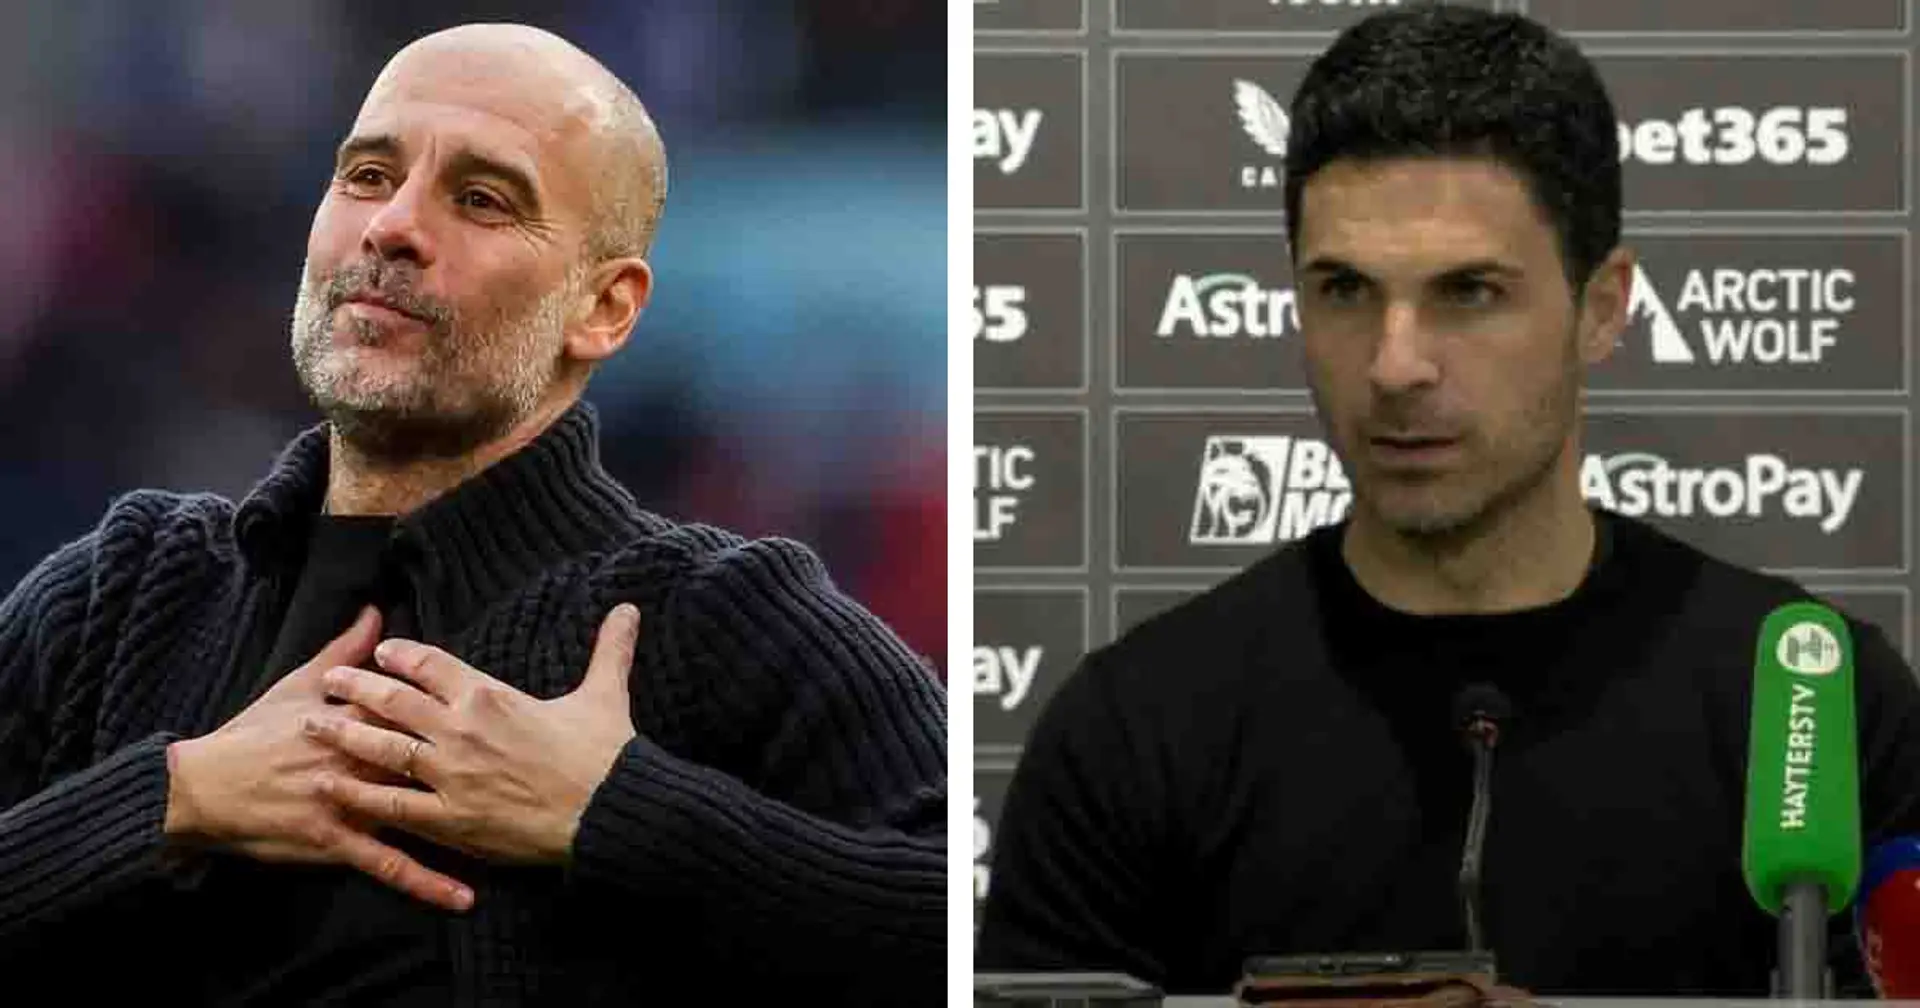 'It's not about Pep or myself': Arteta agrees with Guardiola in criticizing PL schedule